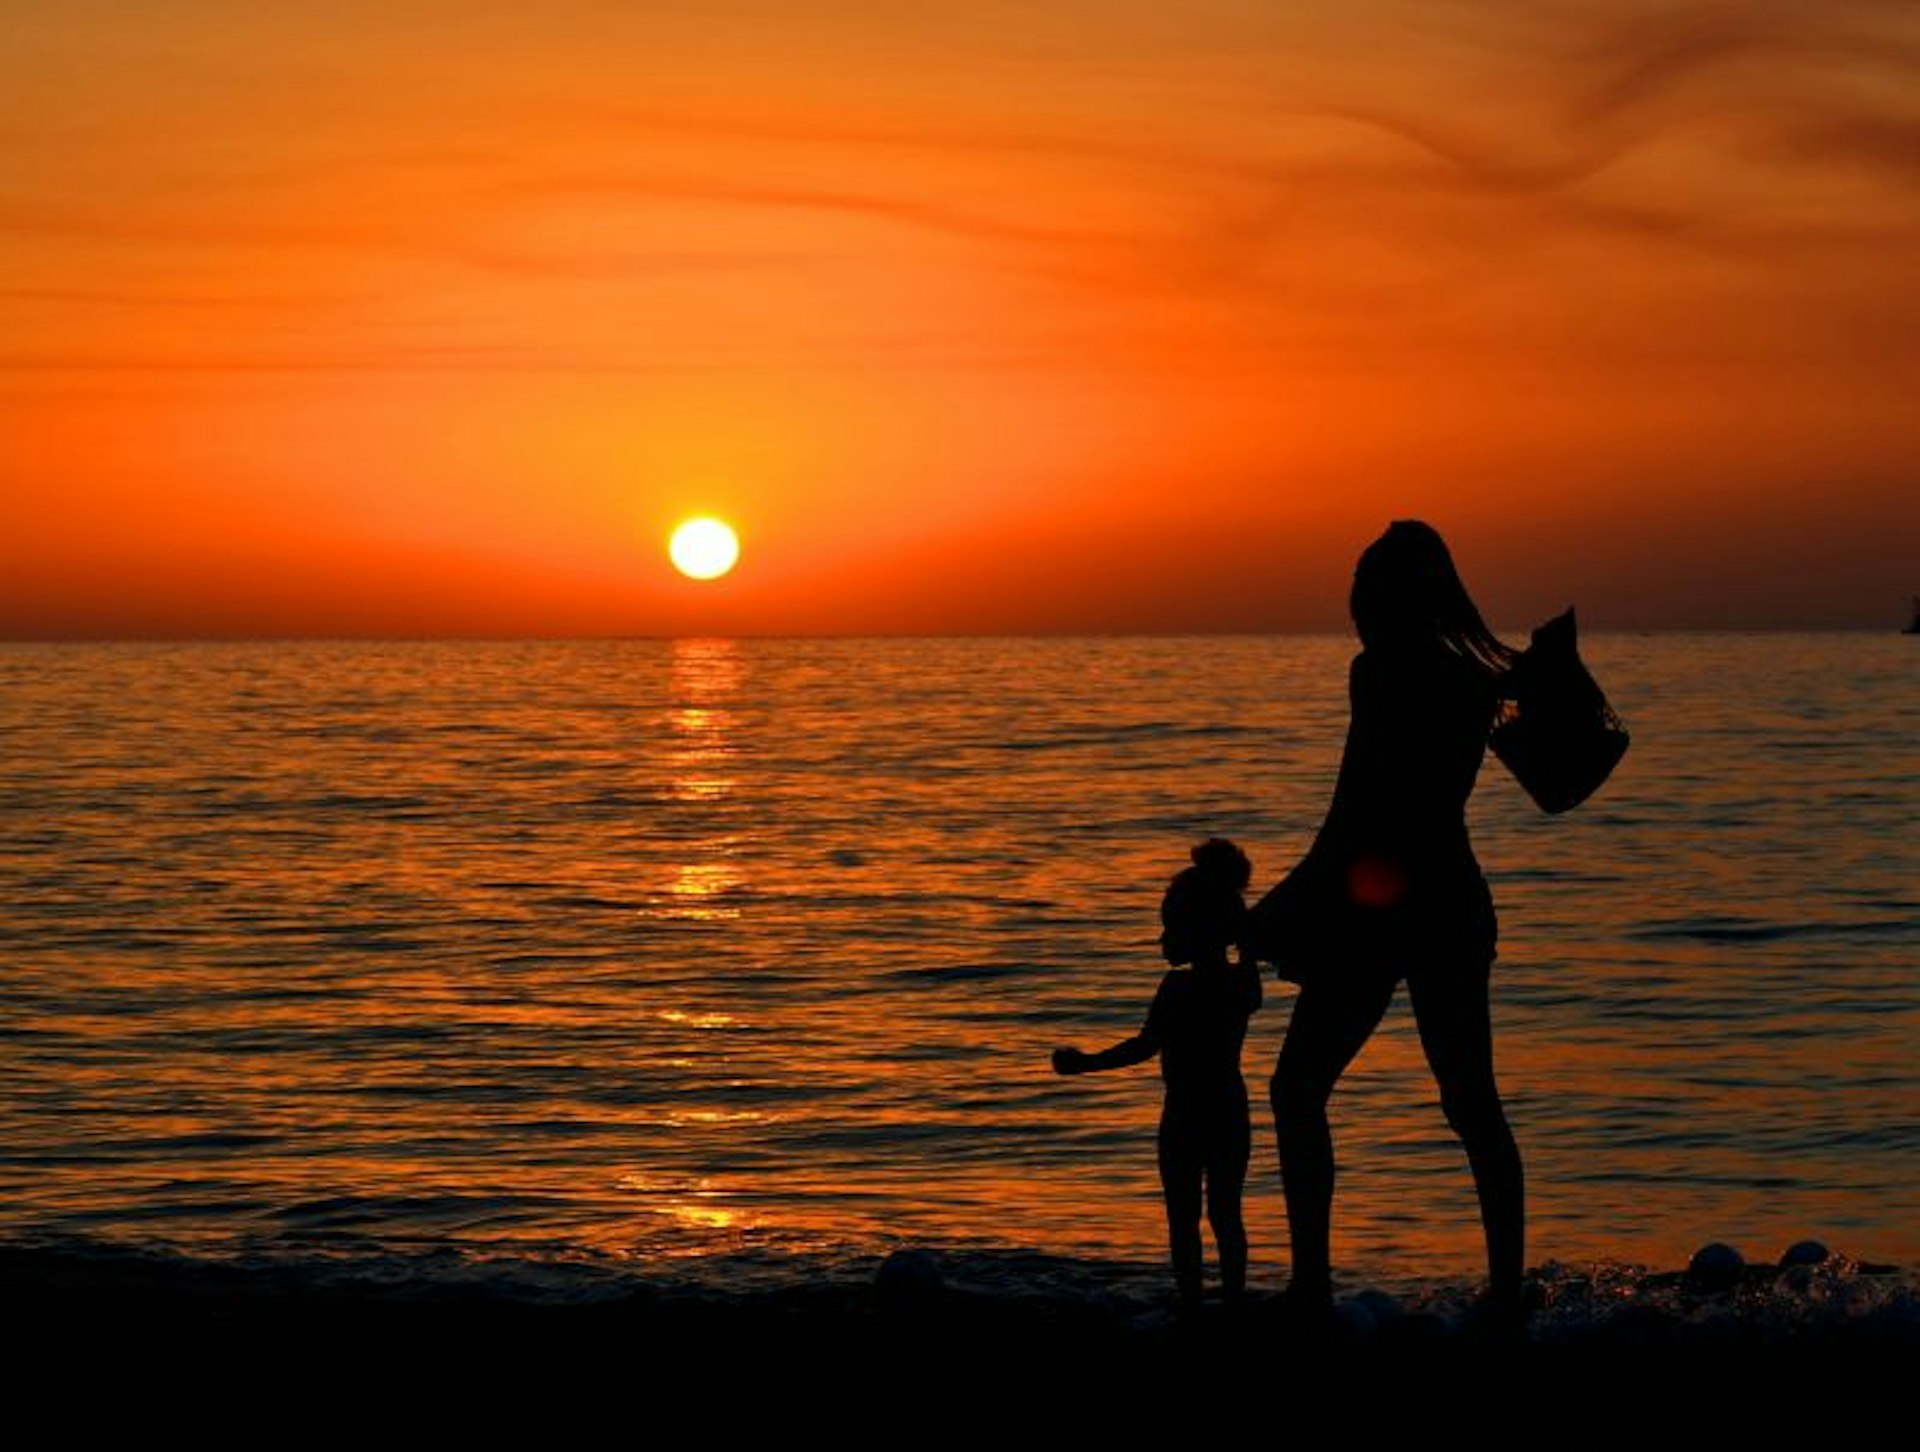 A woman and a young child are in silhouette as they walk on the beach at sunrise